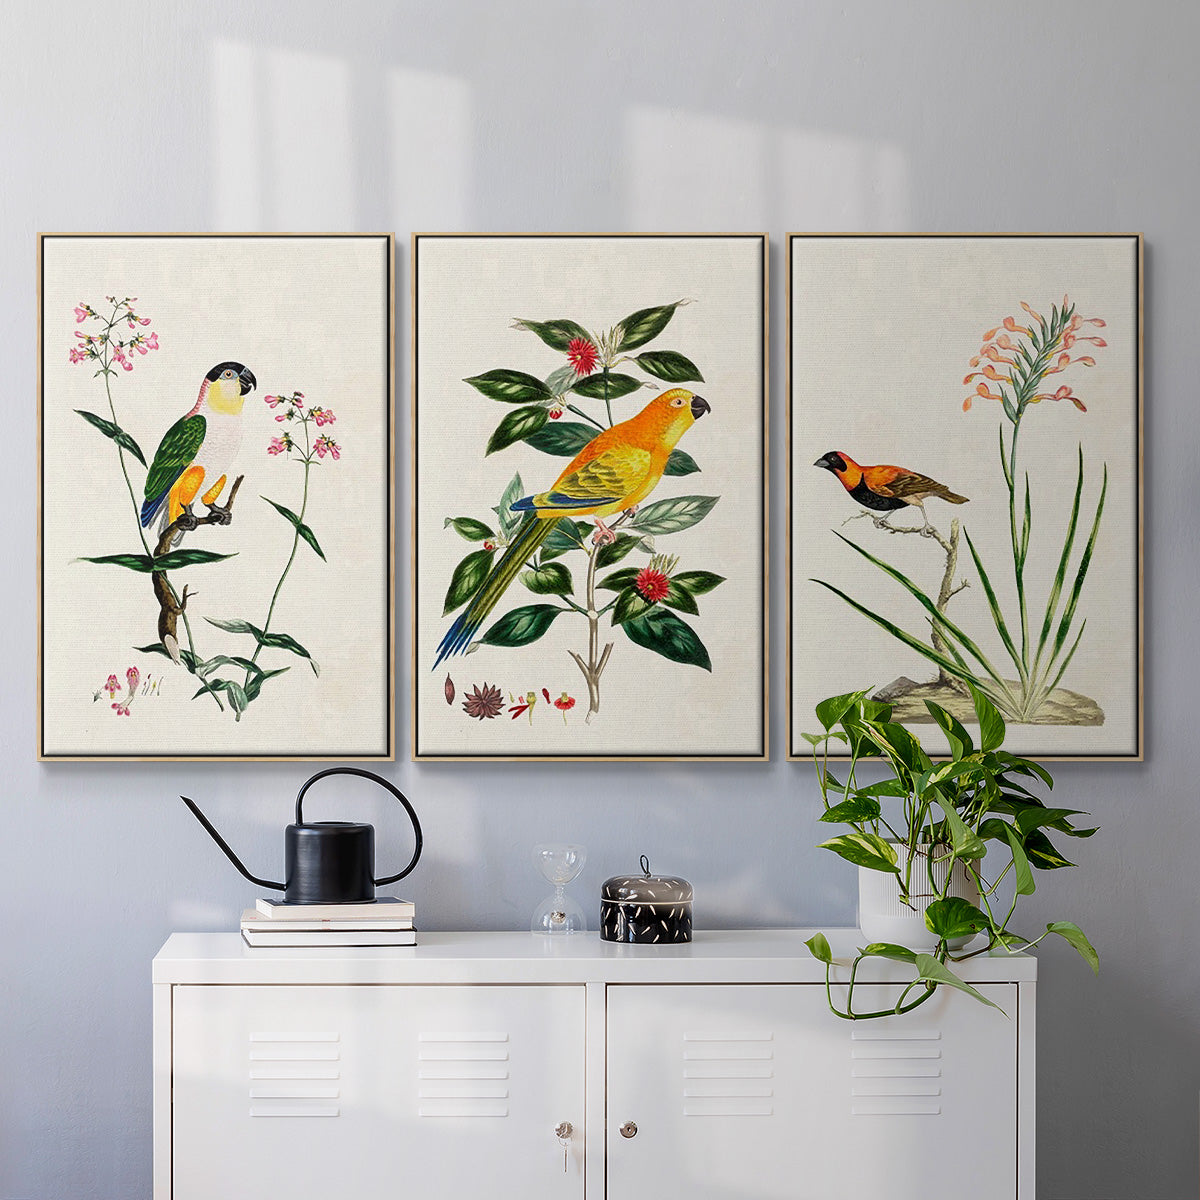 Bird in Habitat III - Framed Premium Gallery Wrapped Canvas L Frame 3 Piece Set - Ready to Hang